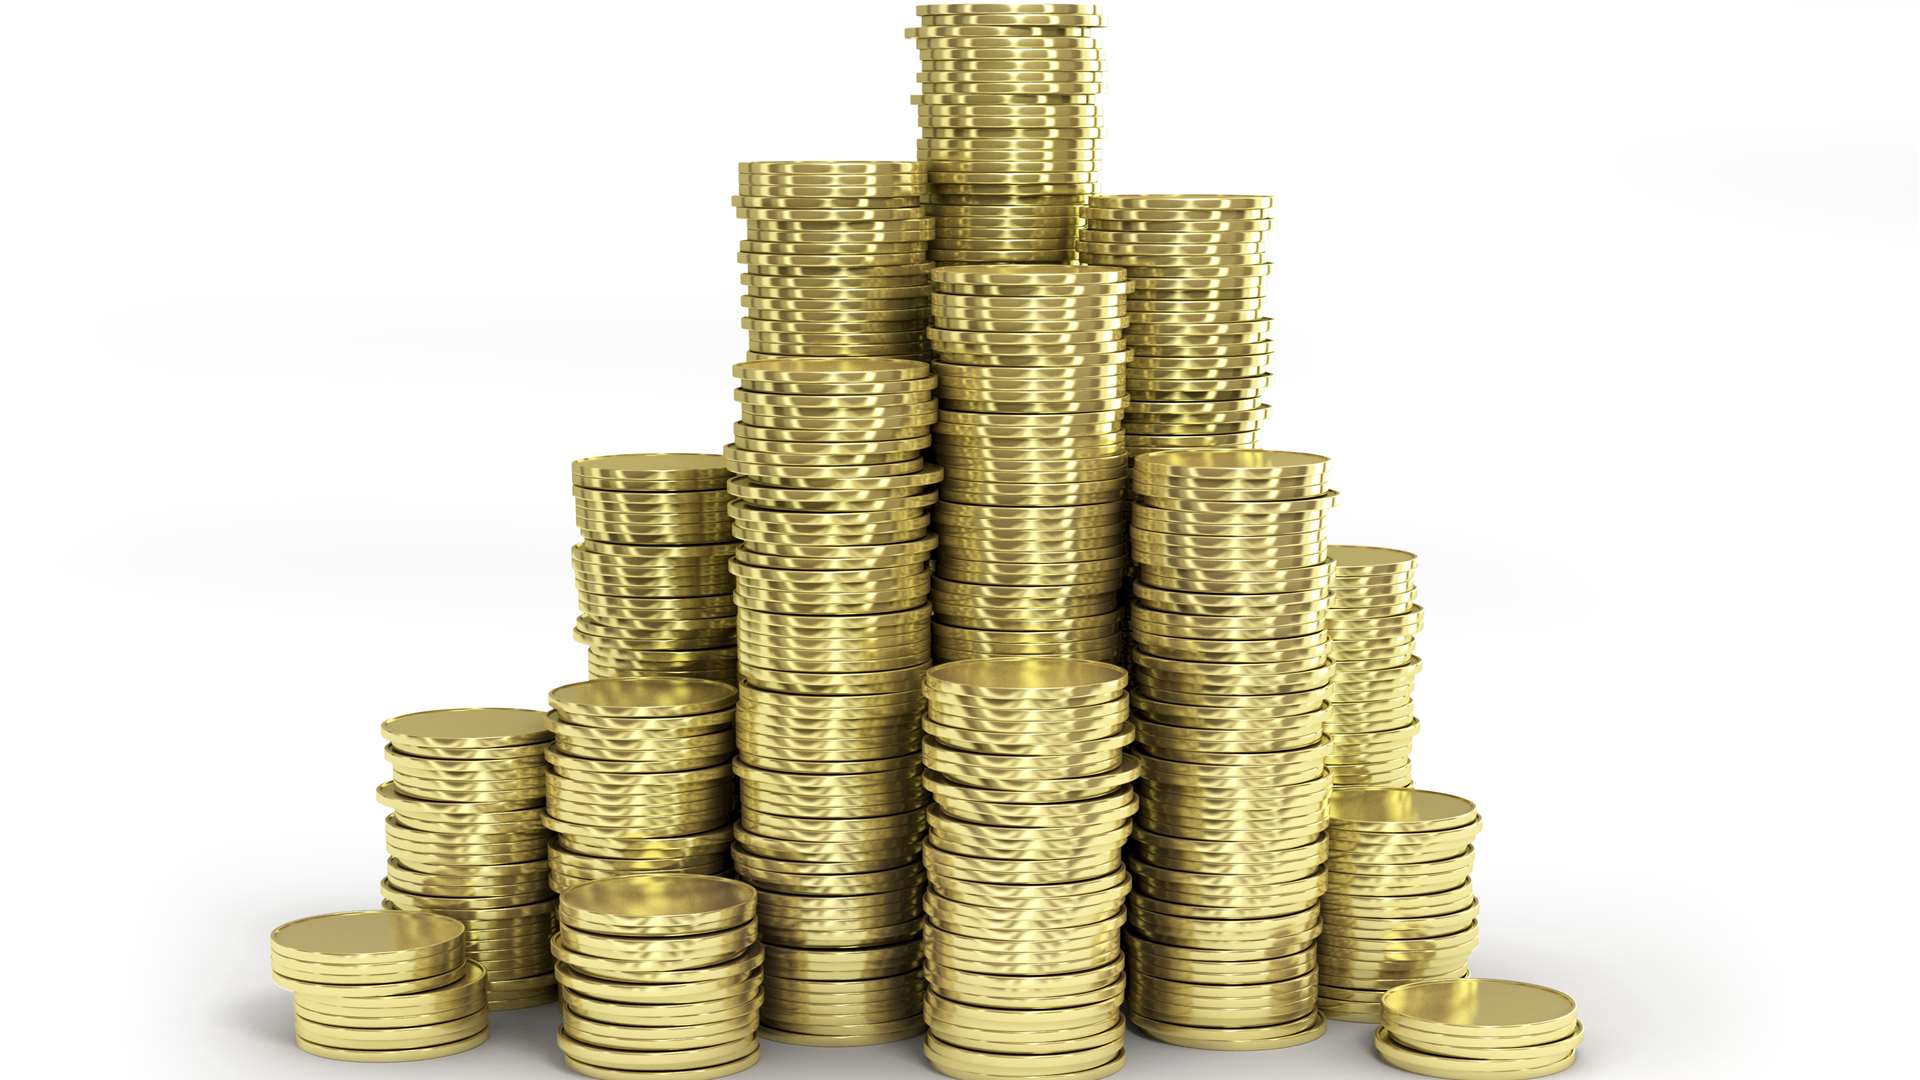 It is hoped the investment will draw more savers to the bank. Picture: Thinkstock